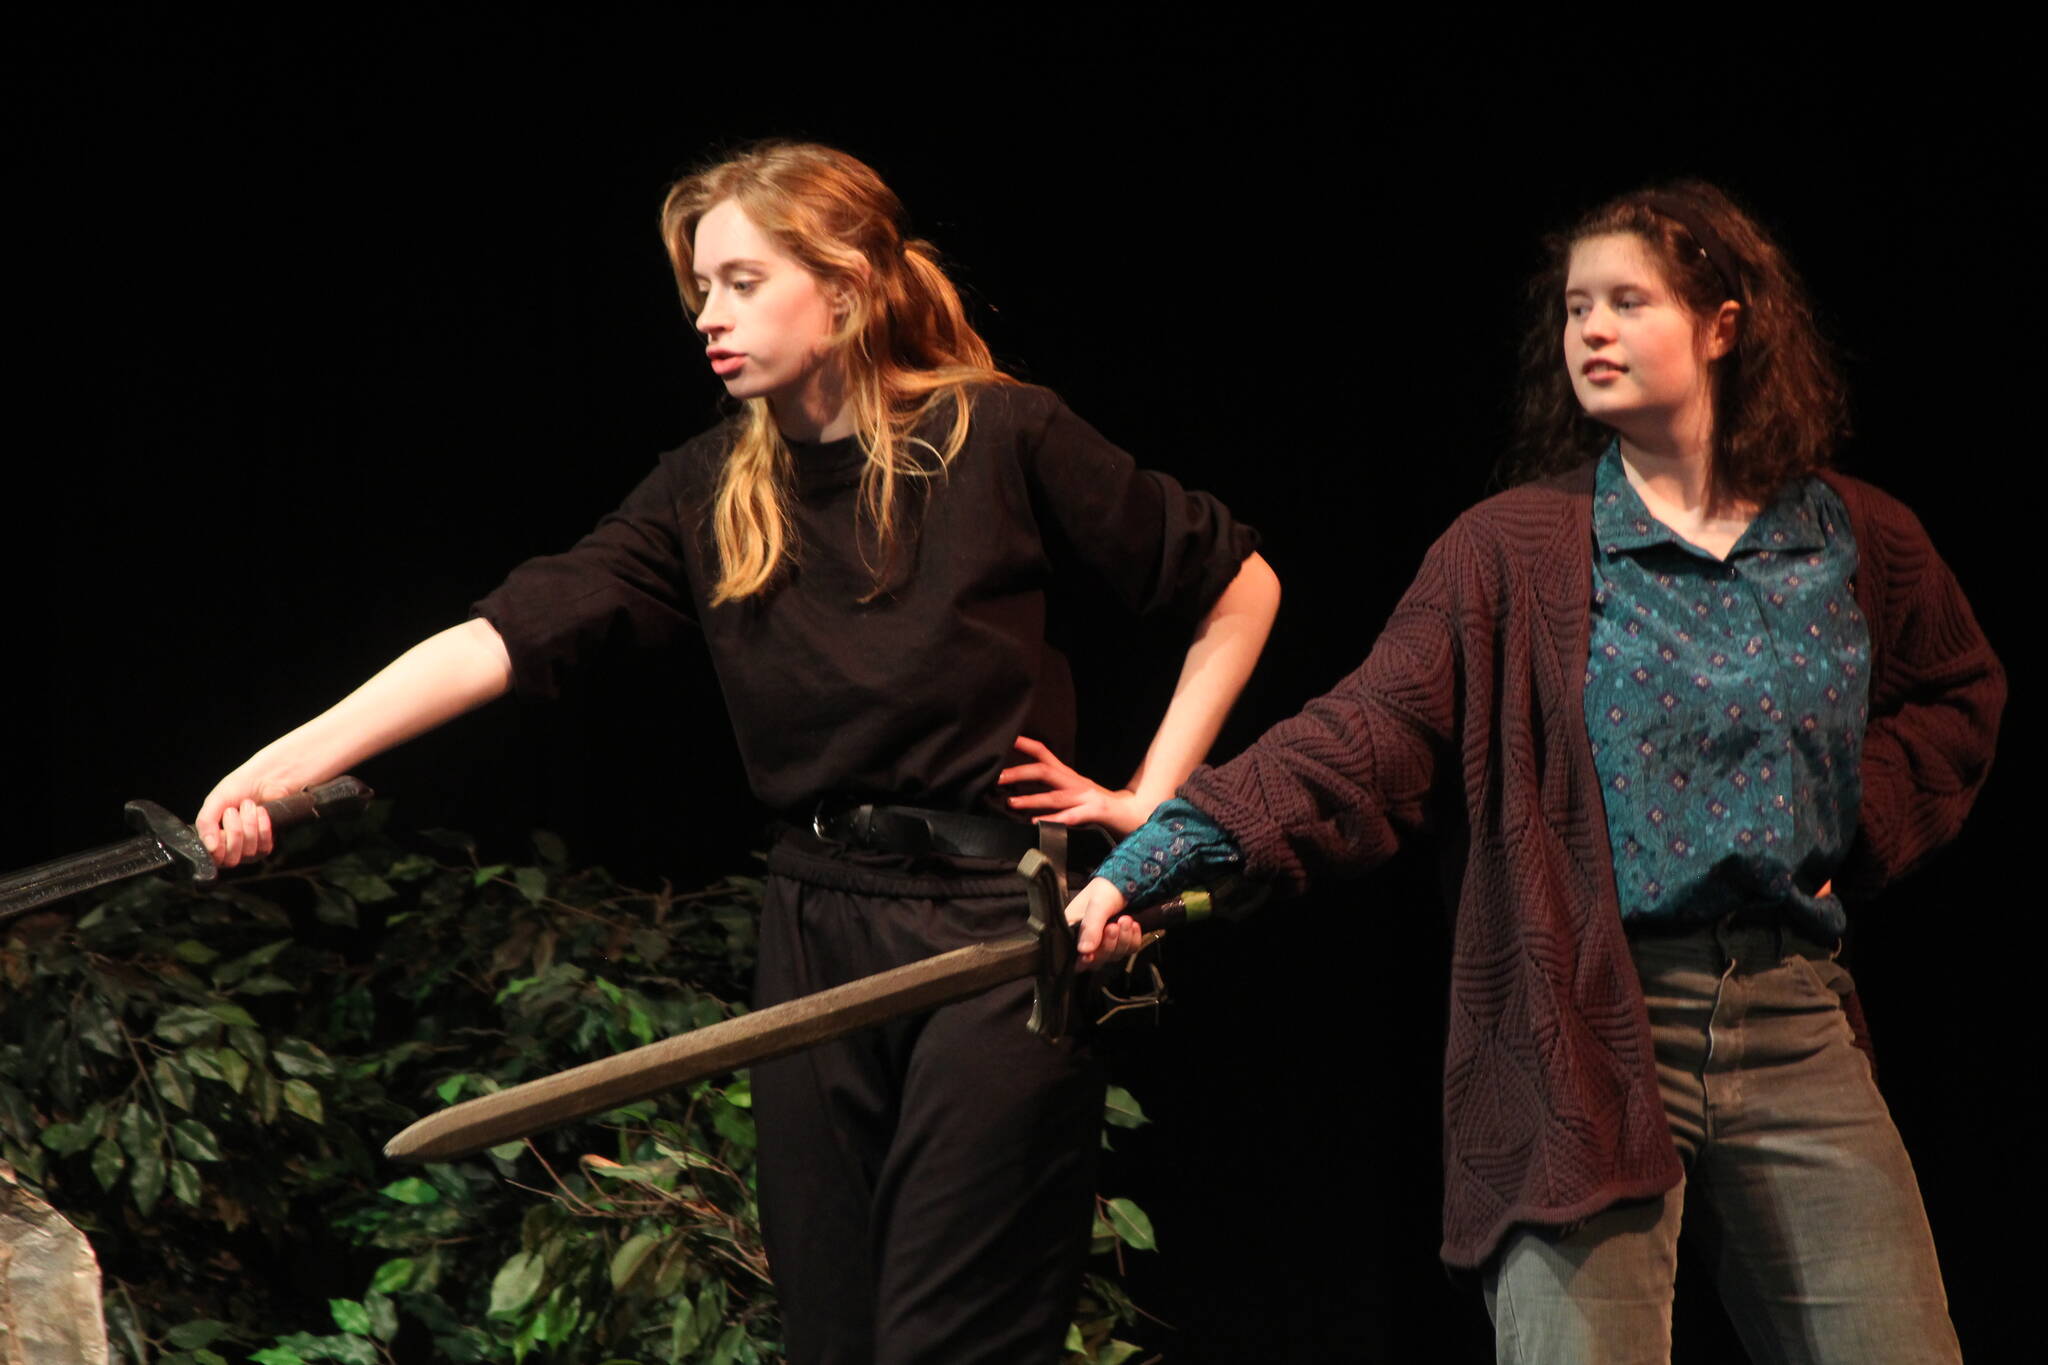 Wynter Arndt, left, and Birdie Sinclair play sisters Tilly and Agnes Evans, who take on monsters in a Dungeons and Dragons adventure Tilly wrote before her death.